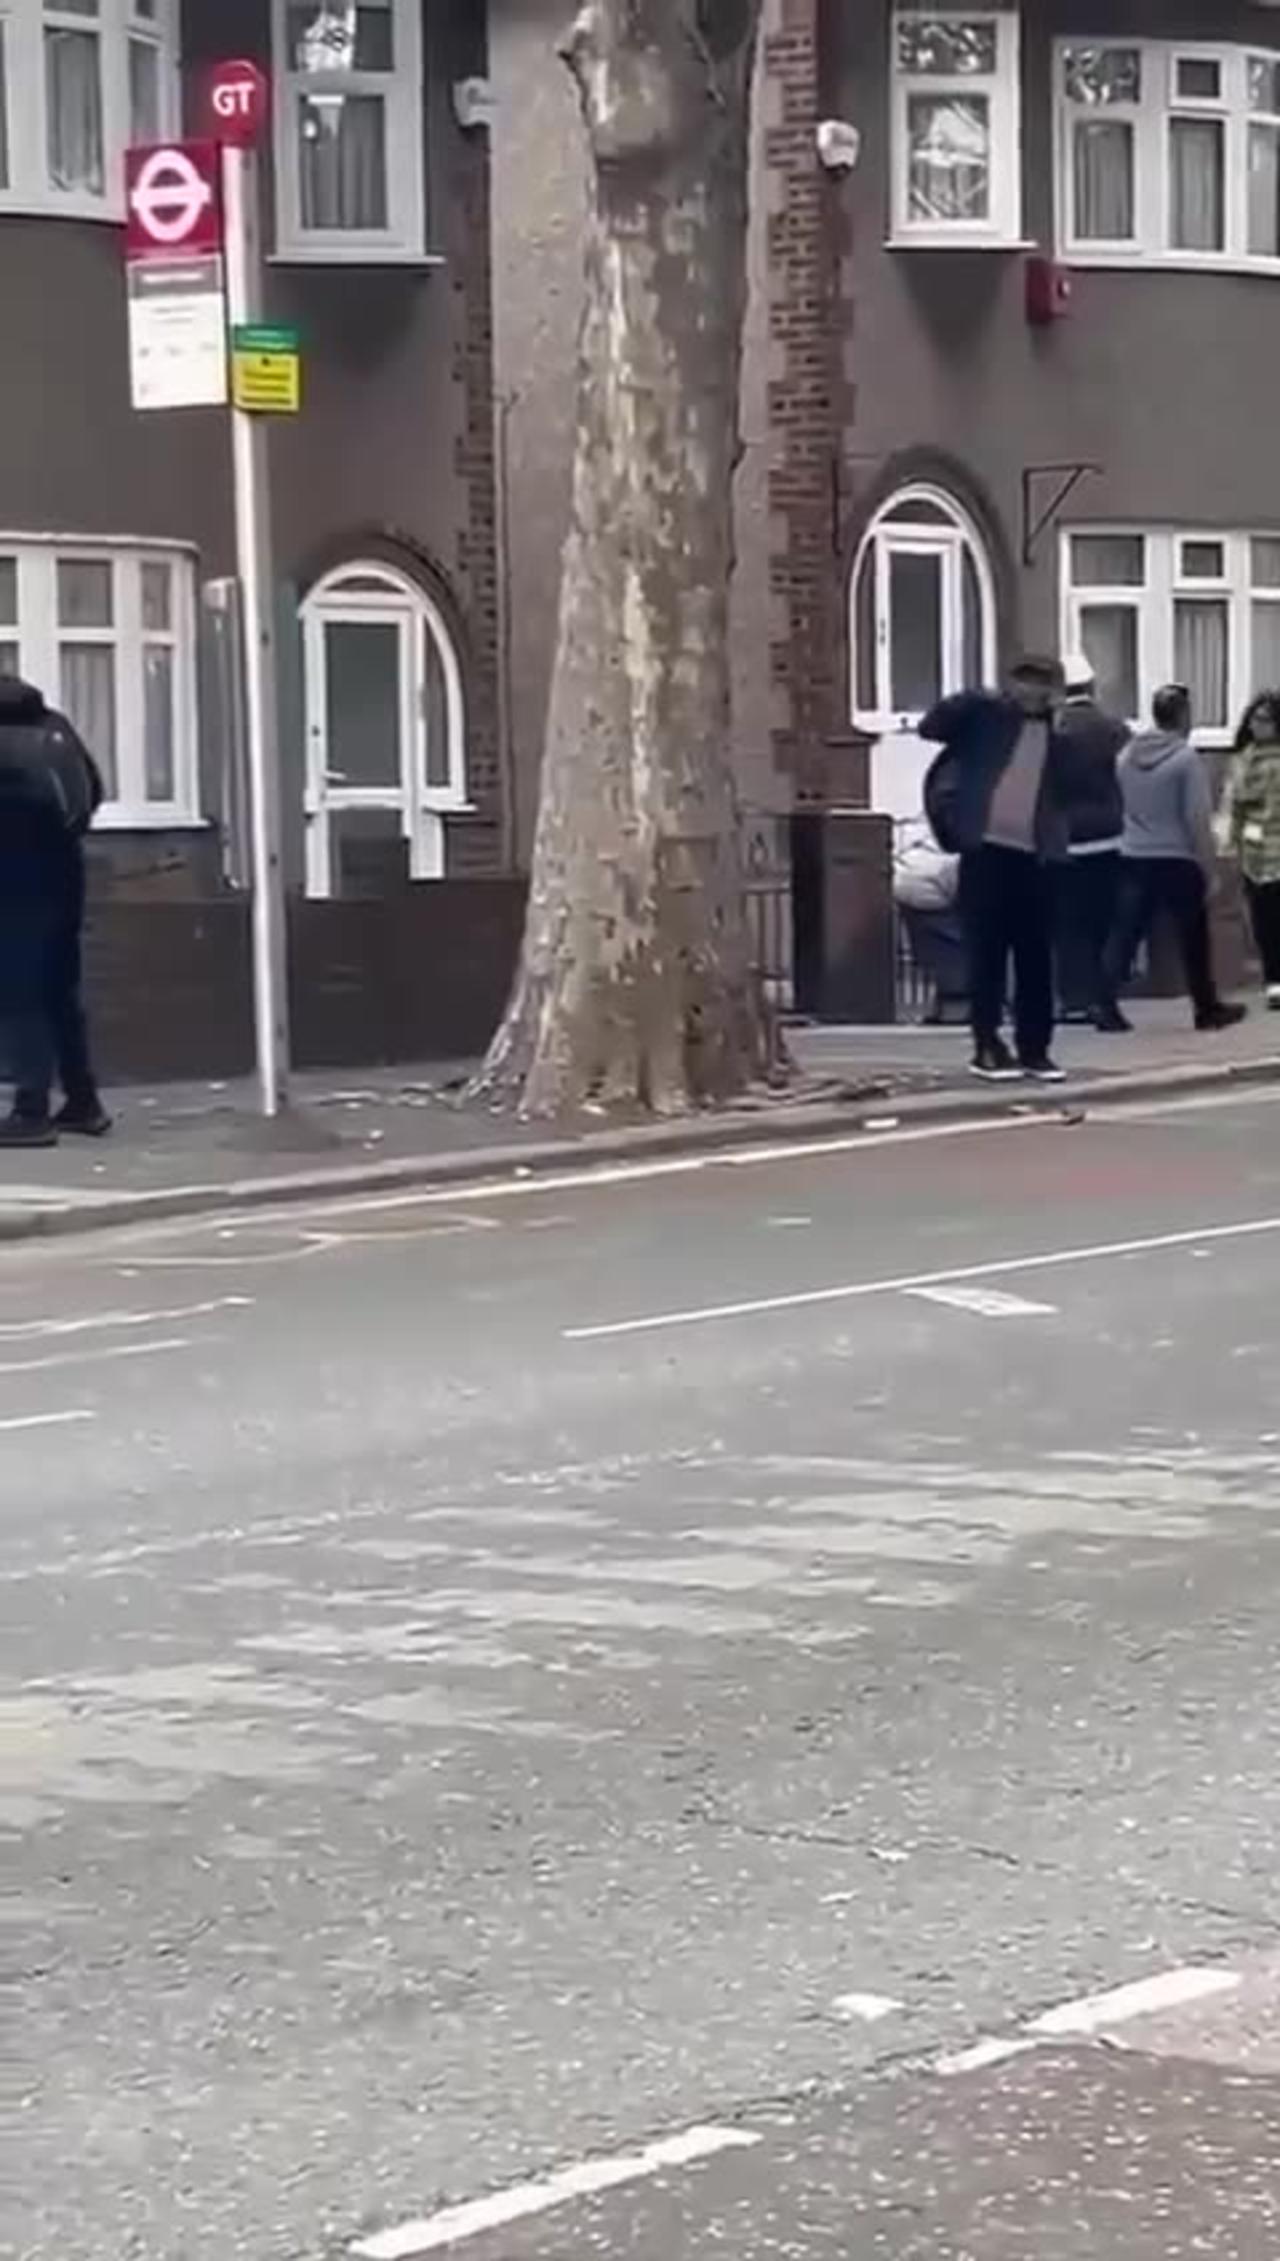 Armed police swooped on an East London college yesterday after two